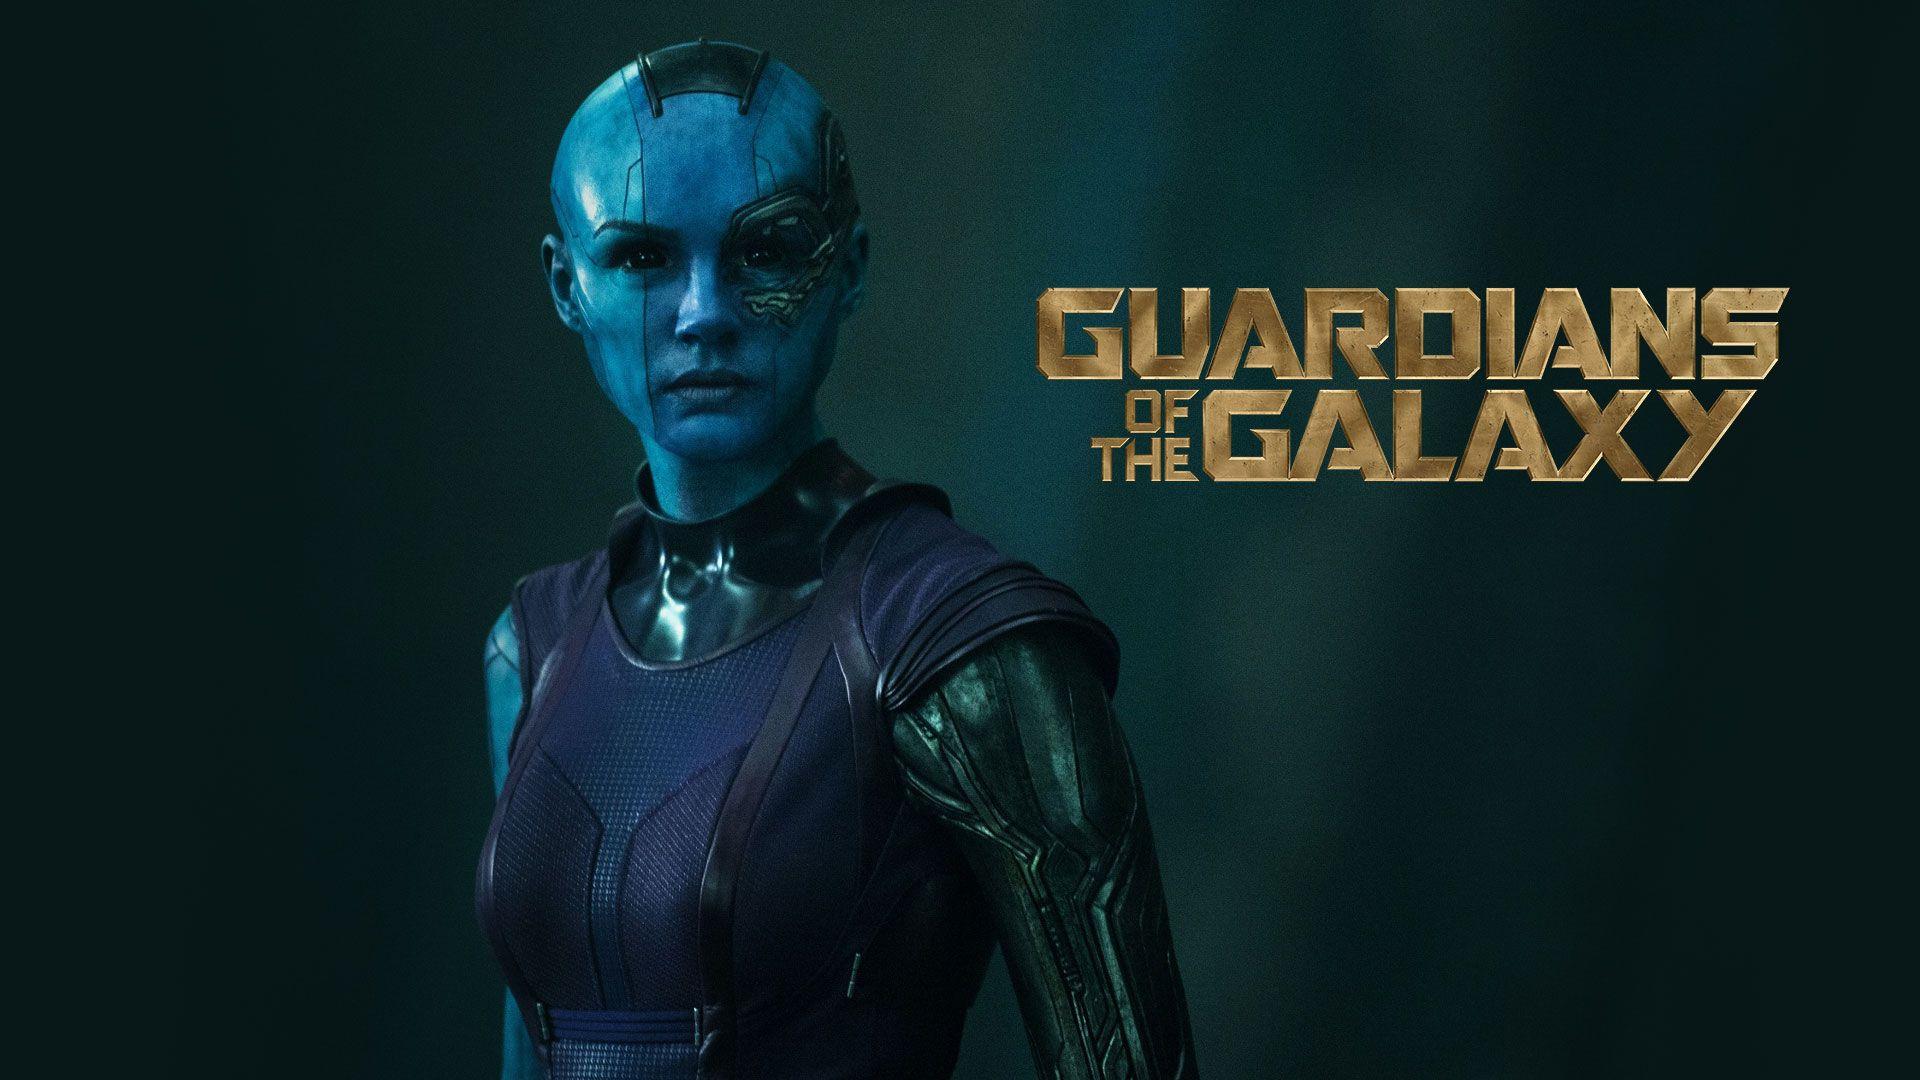 Marvel's Guardians of the Galaxy 2014 HD Wallpaper for Desktop